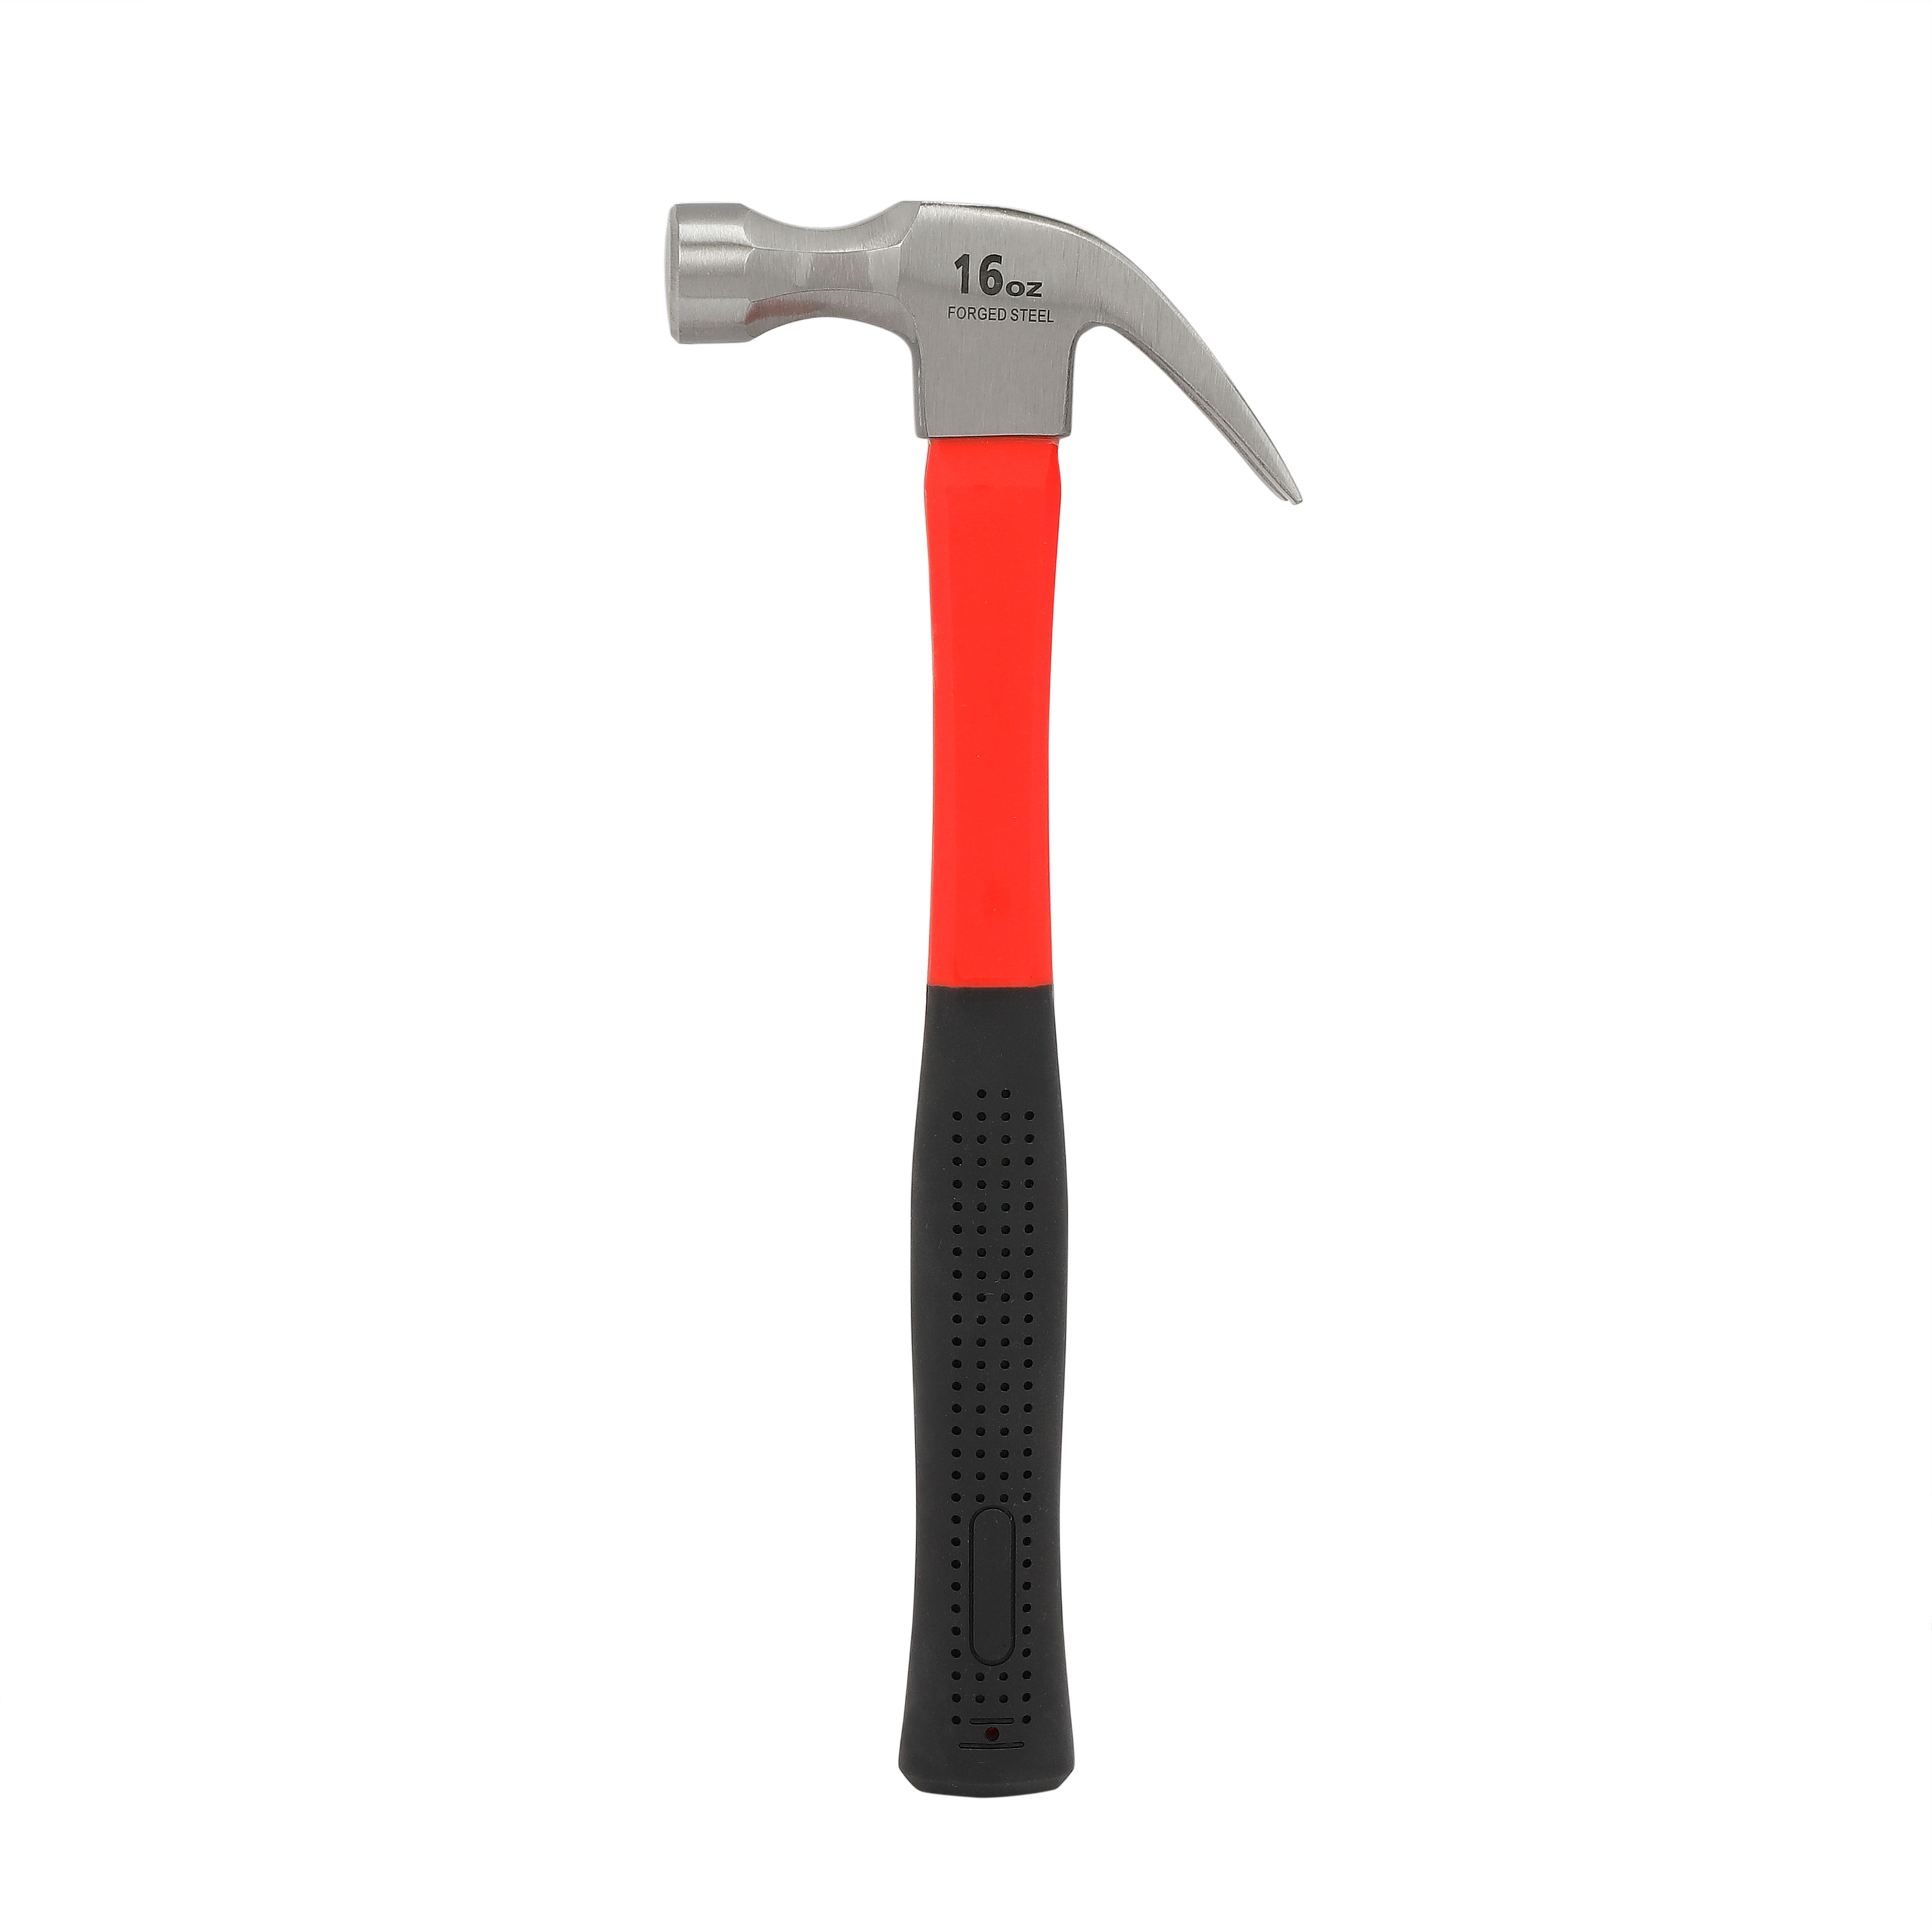 WORKPRO 16-oz Smooth Face Steel Head Fiberglass Claw Hammer in the